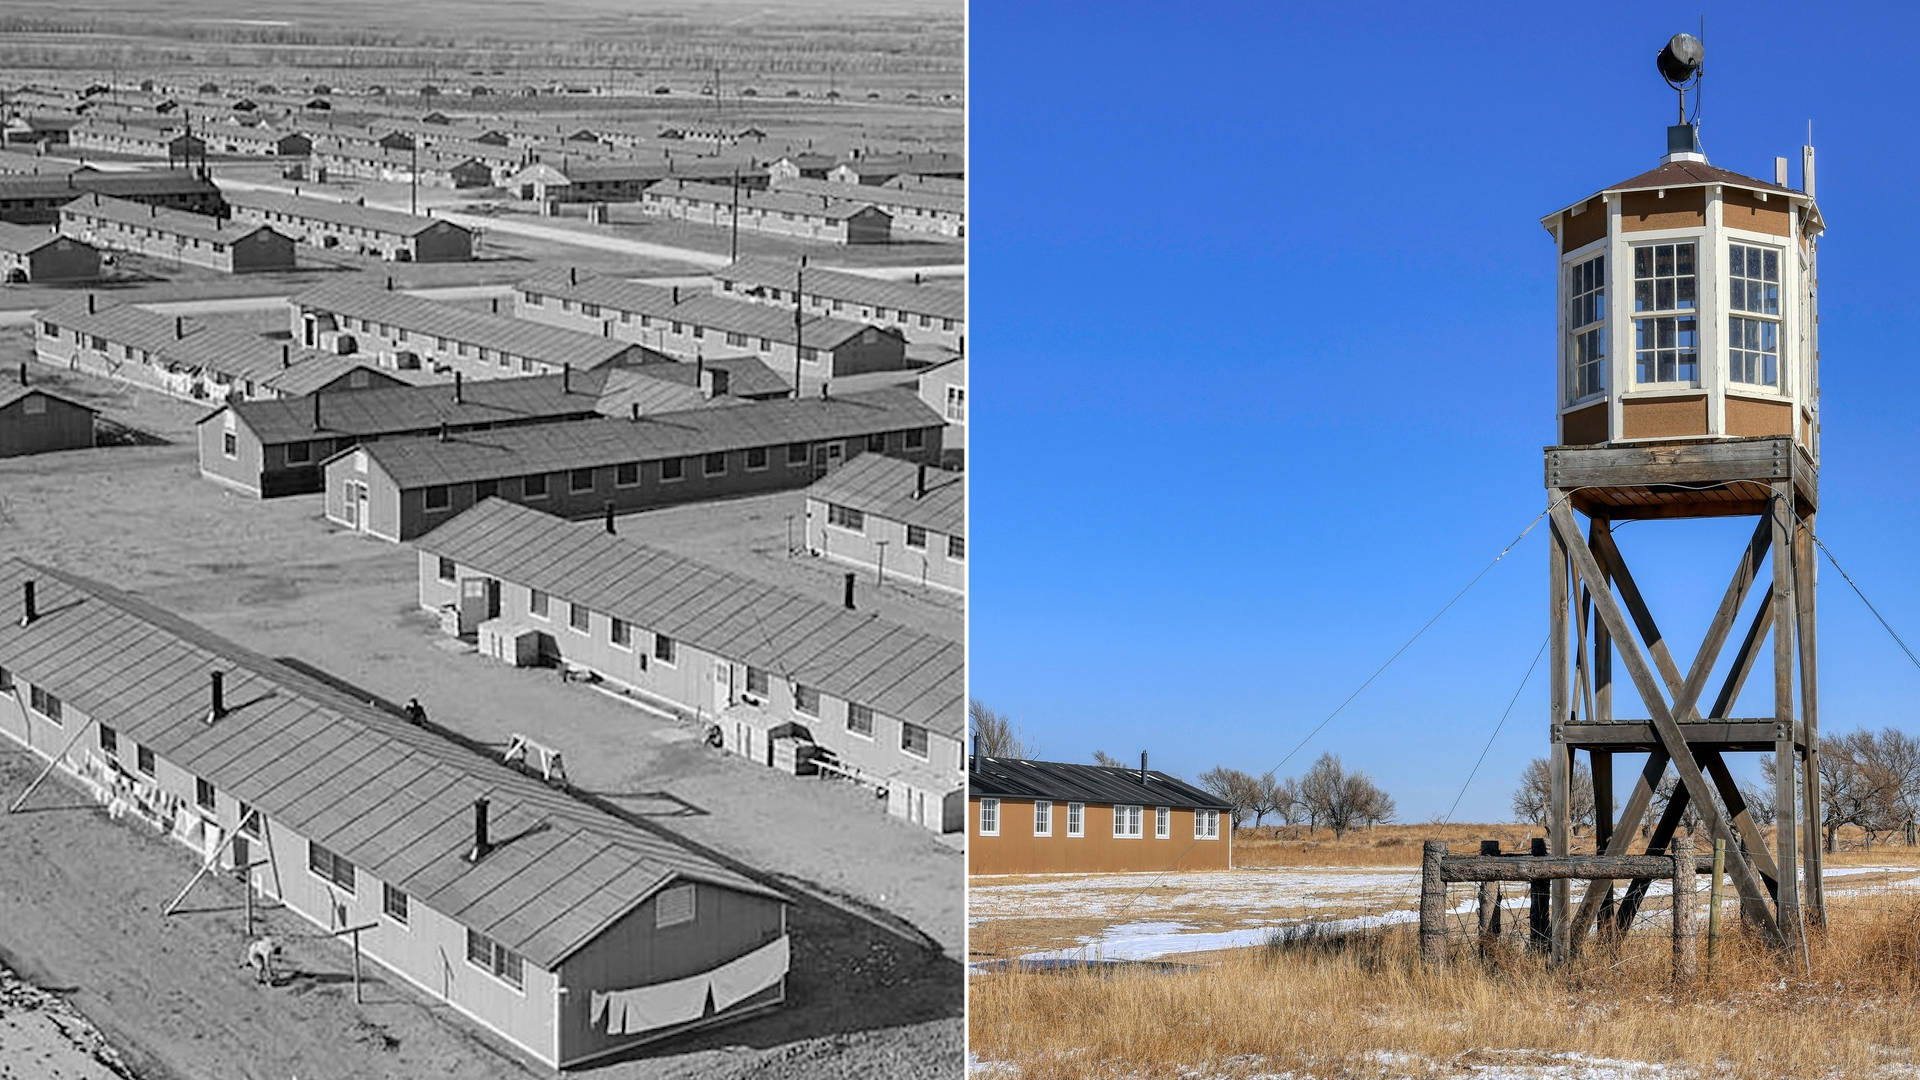 Camp Amache, Former Japanese American Internment Camp, Opens as